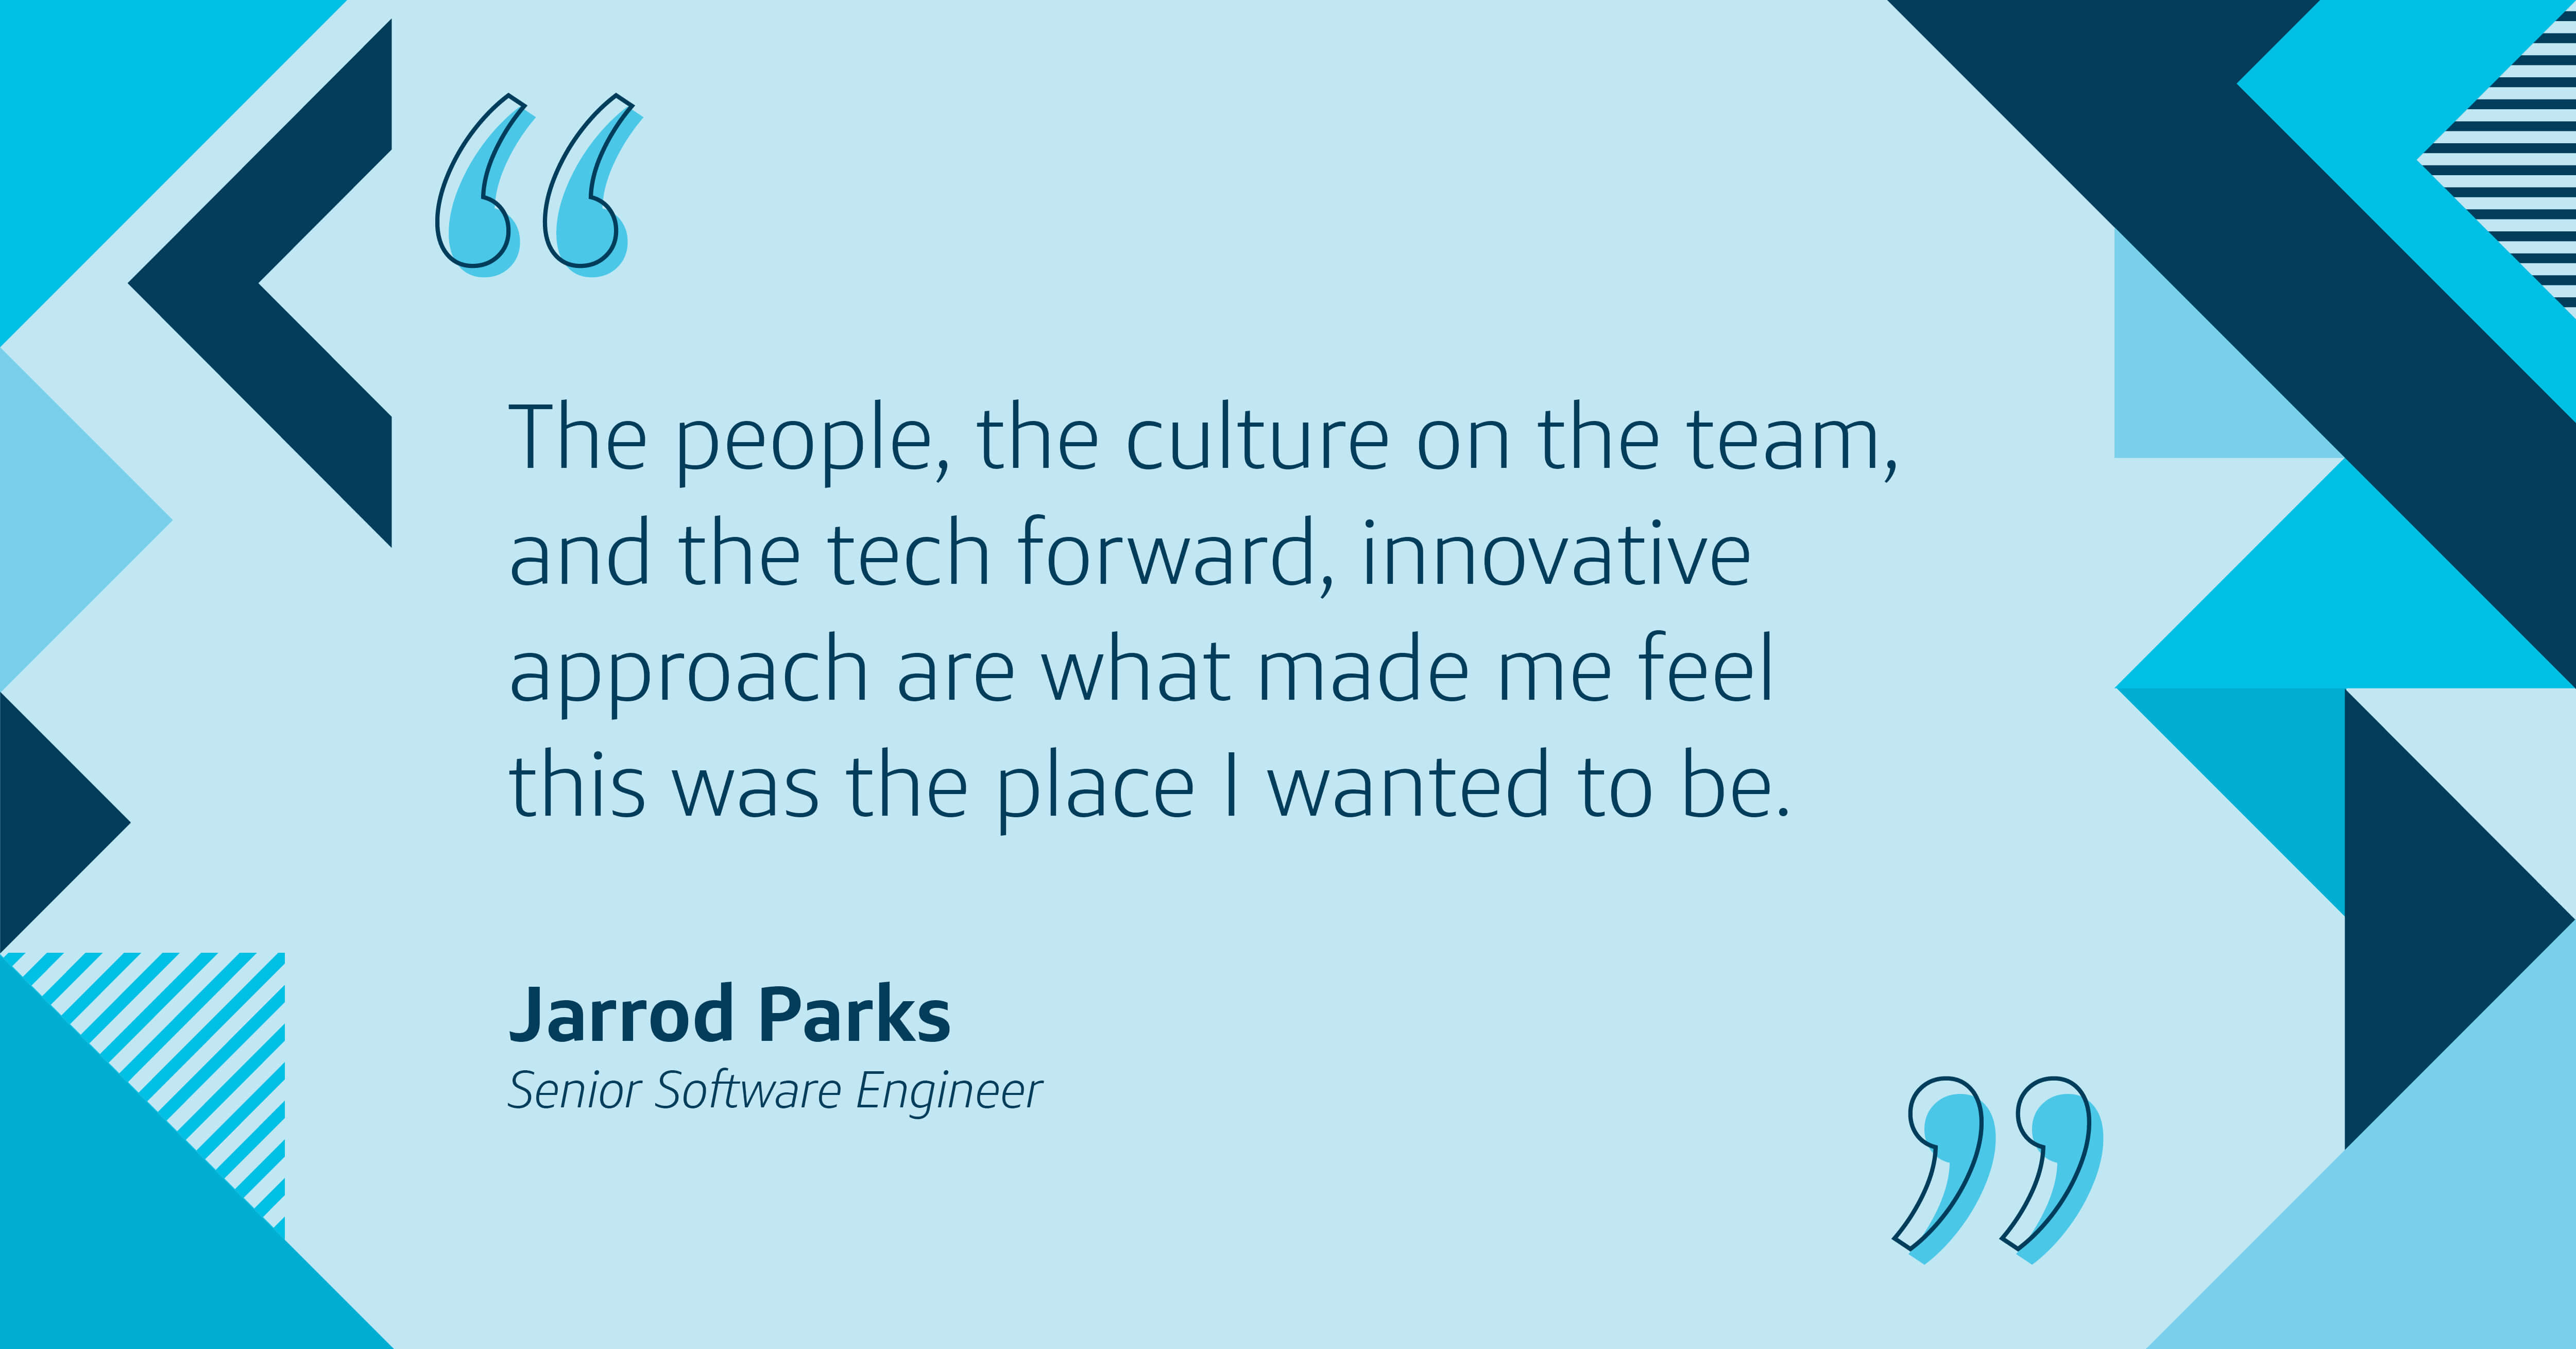 “The people, the culture on the team, and the tech forward, innovative approach are what made me feel this was the place I wanted to be,” Jarrod shared about his attraction to Capital One.